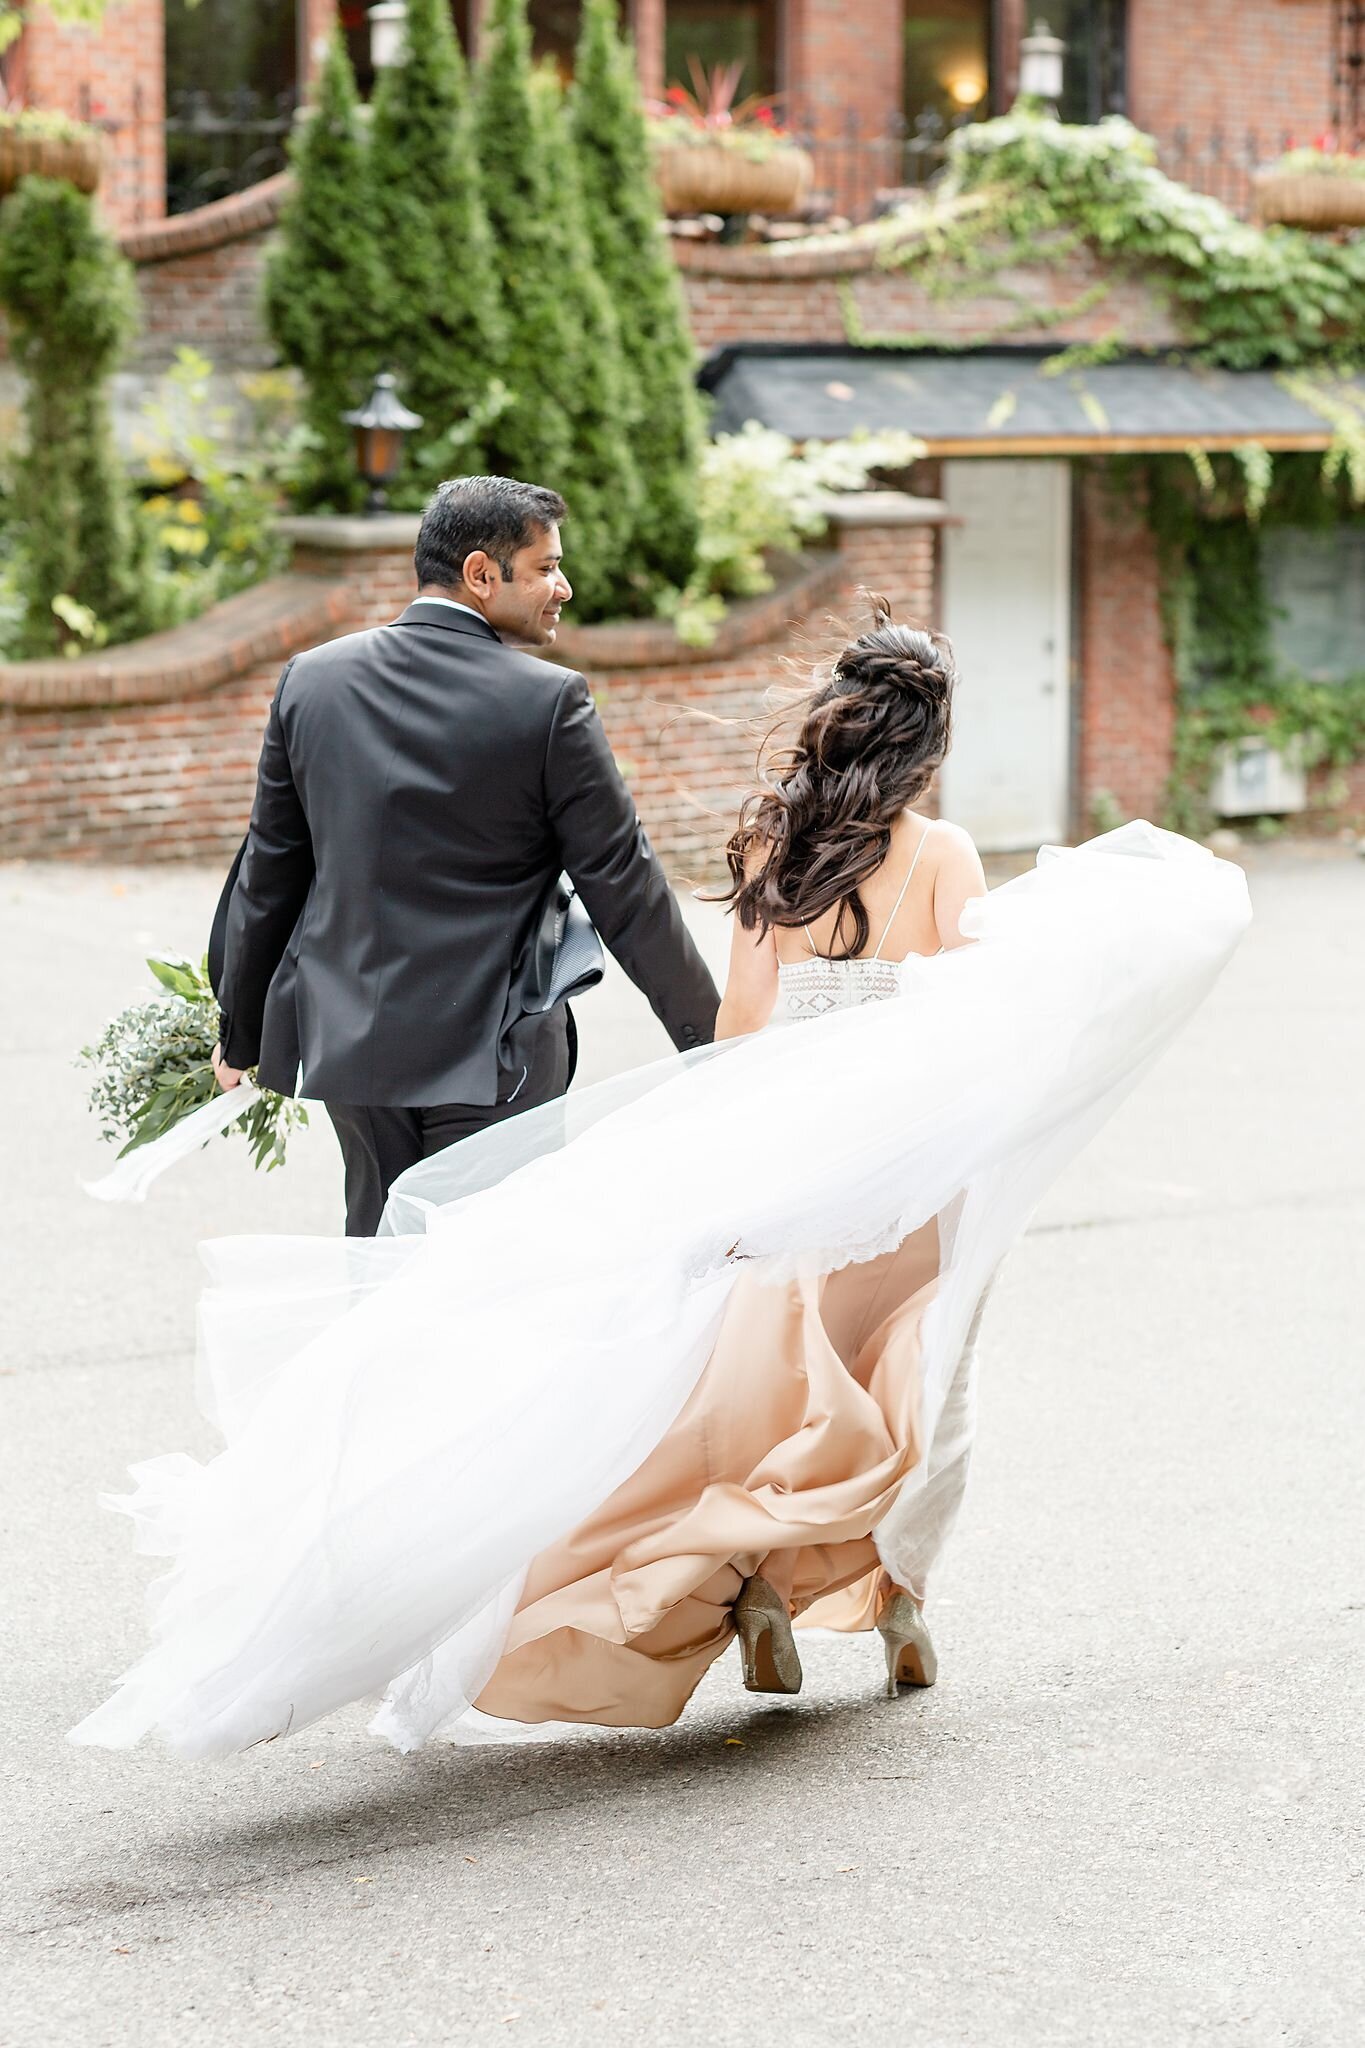 Bride-and-groom-walking-around-their-wedding-venue-with-the-wind-blowing-through-the-dress